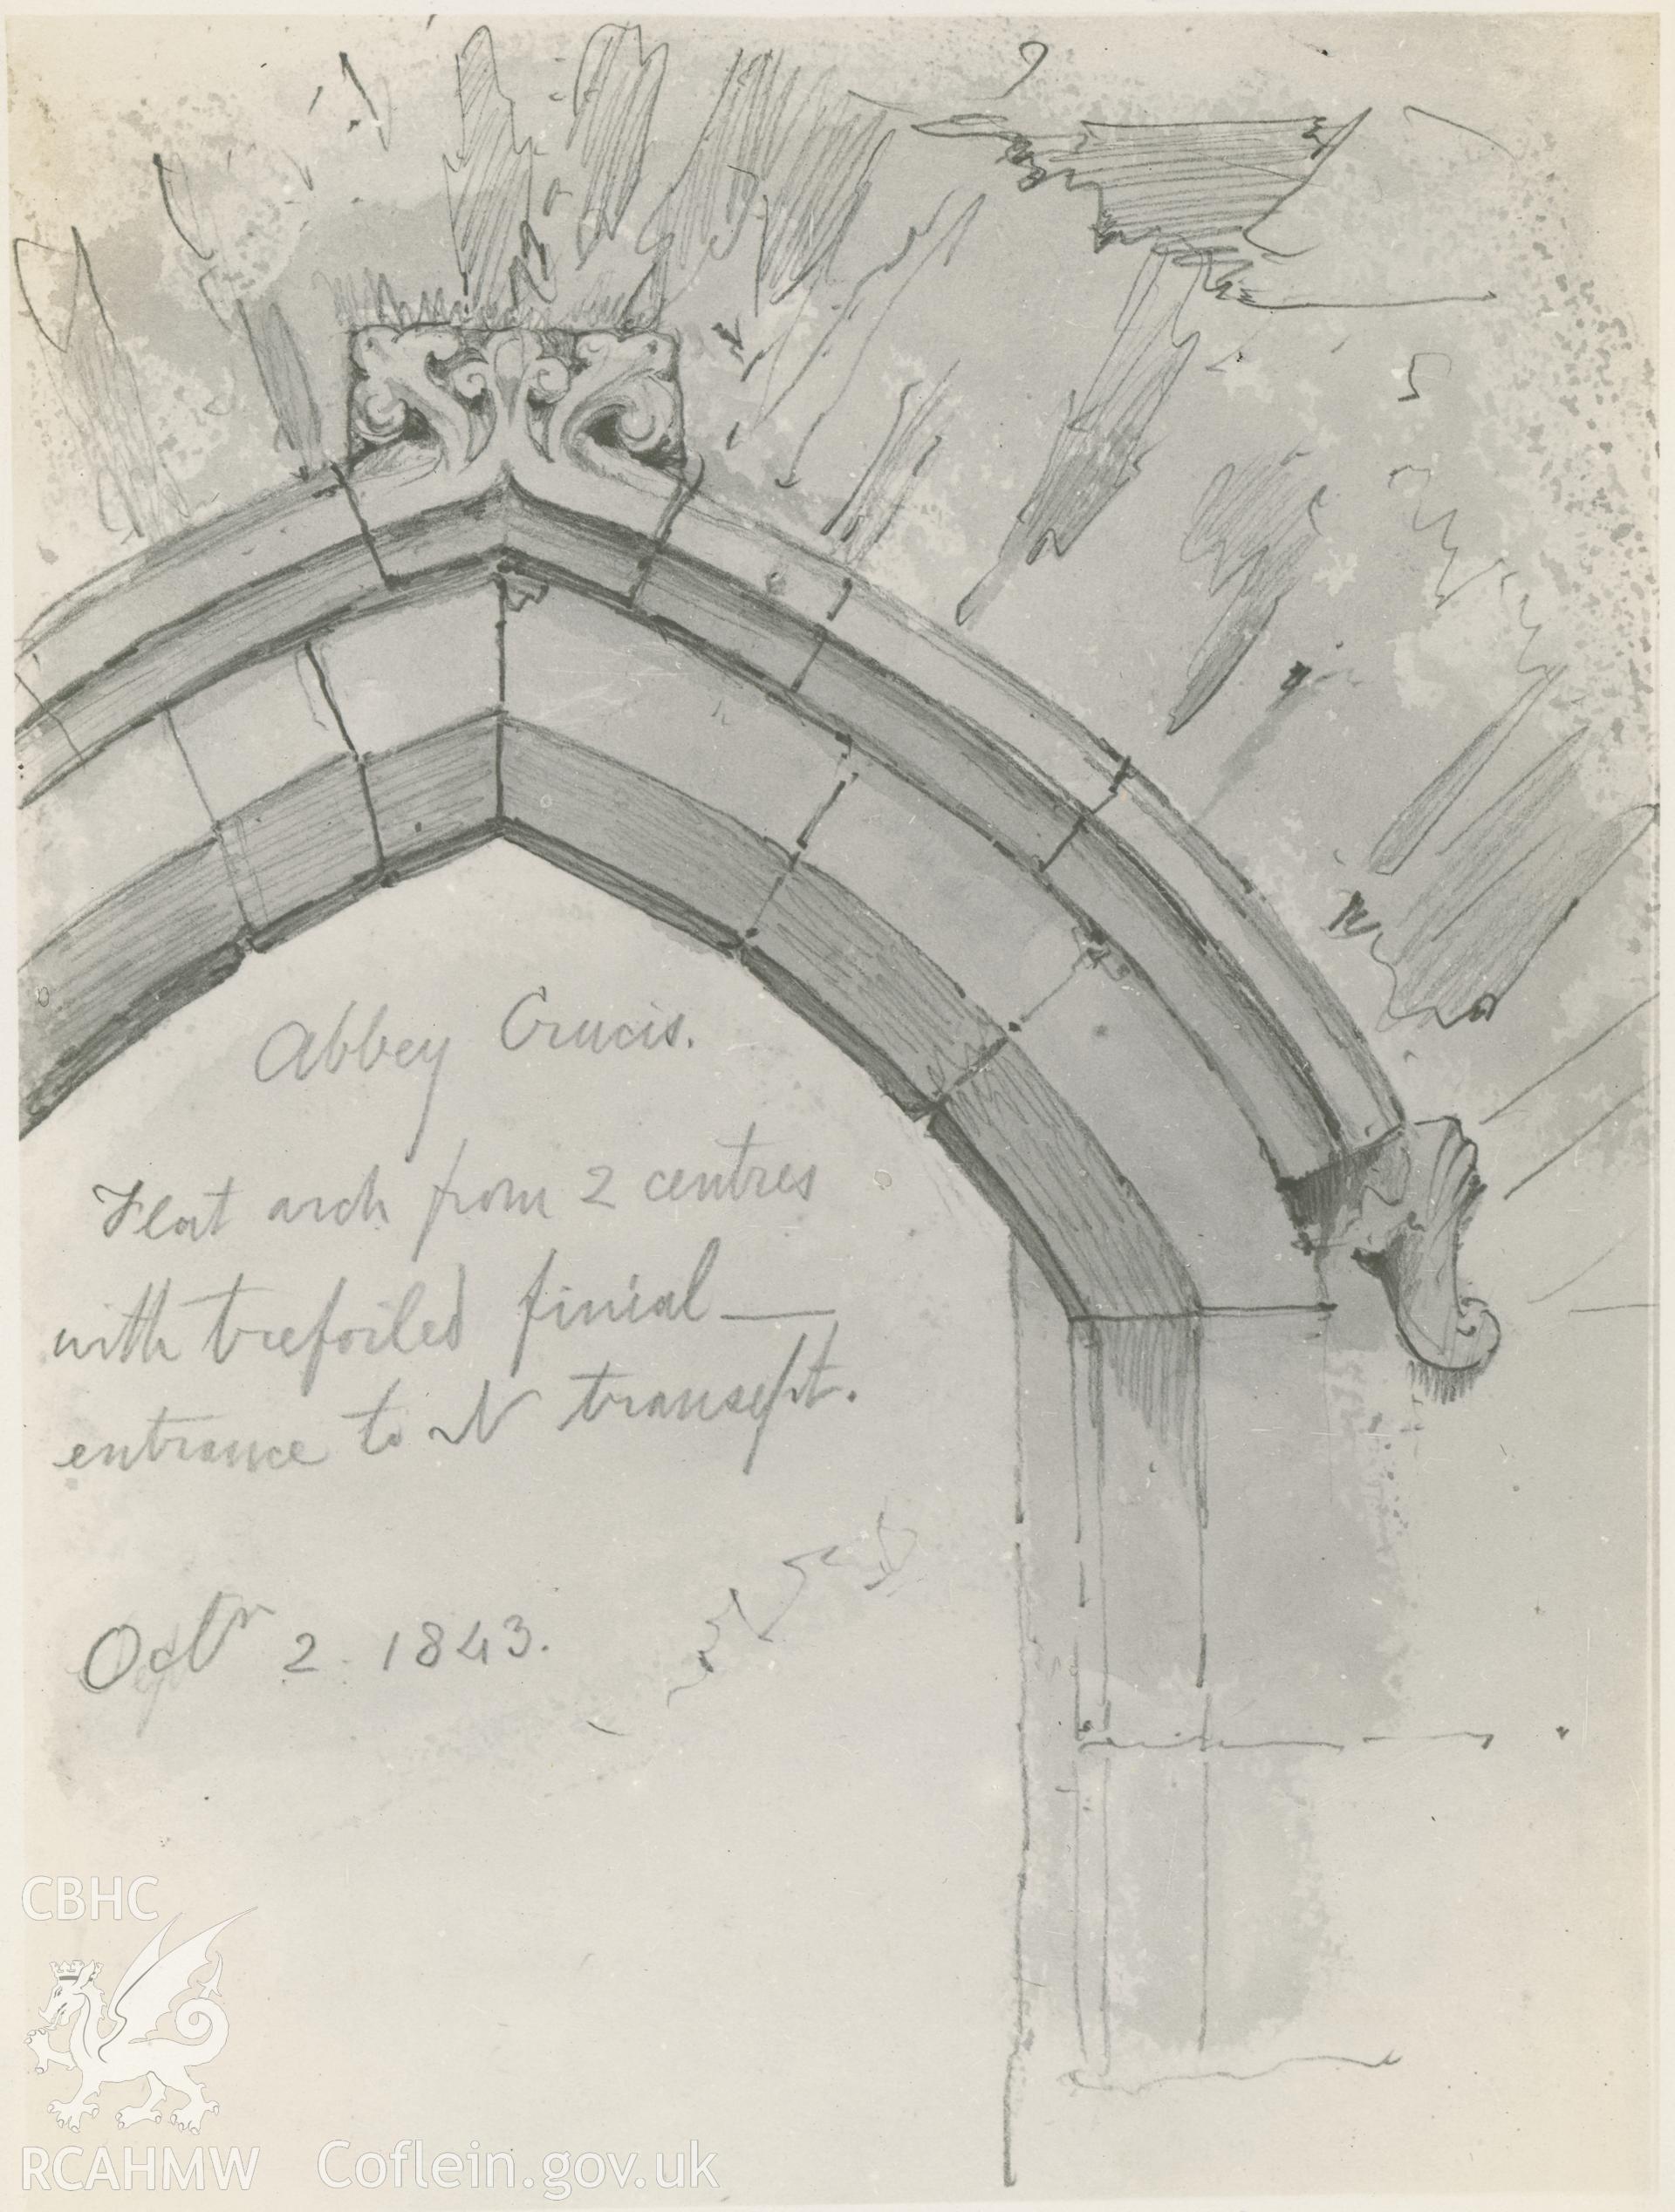 Photograph by Macbeth of an early pencil sketch showing detail of arch at Valle Crucis Abbey.